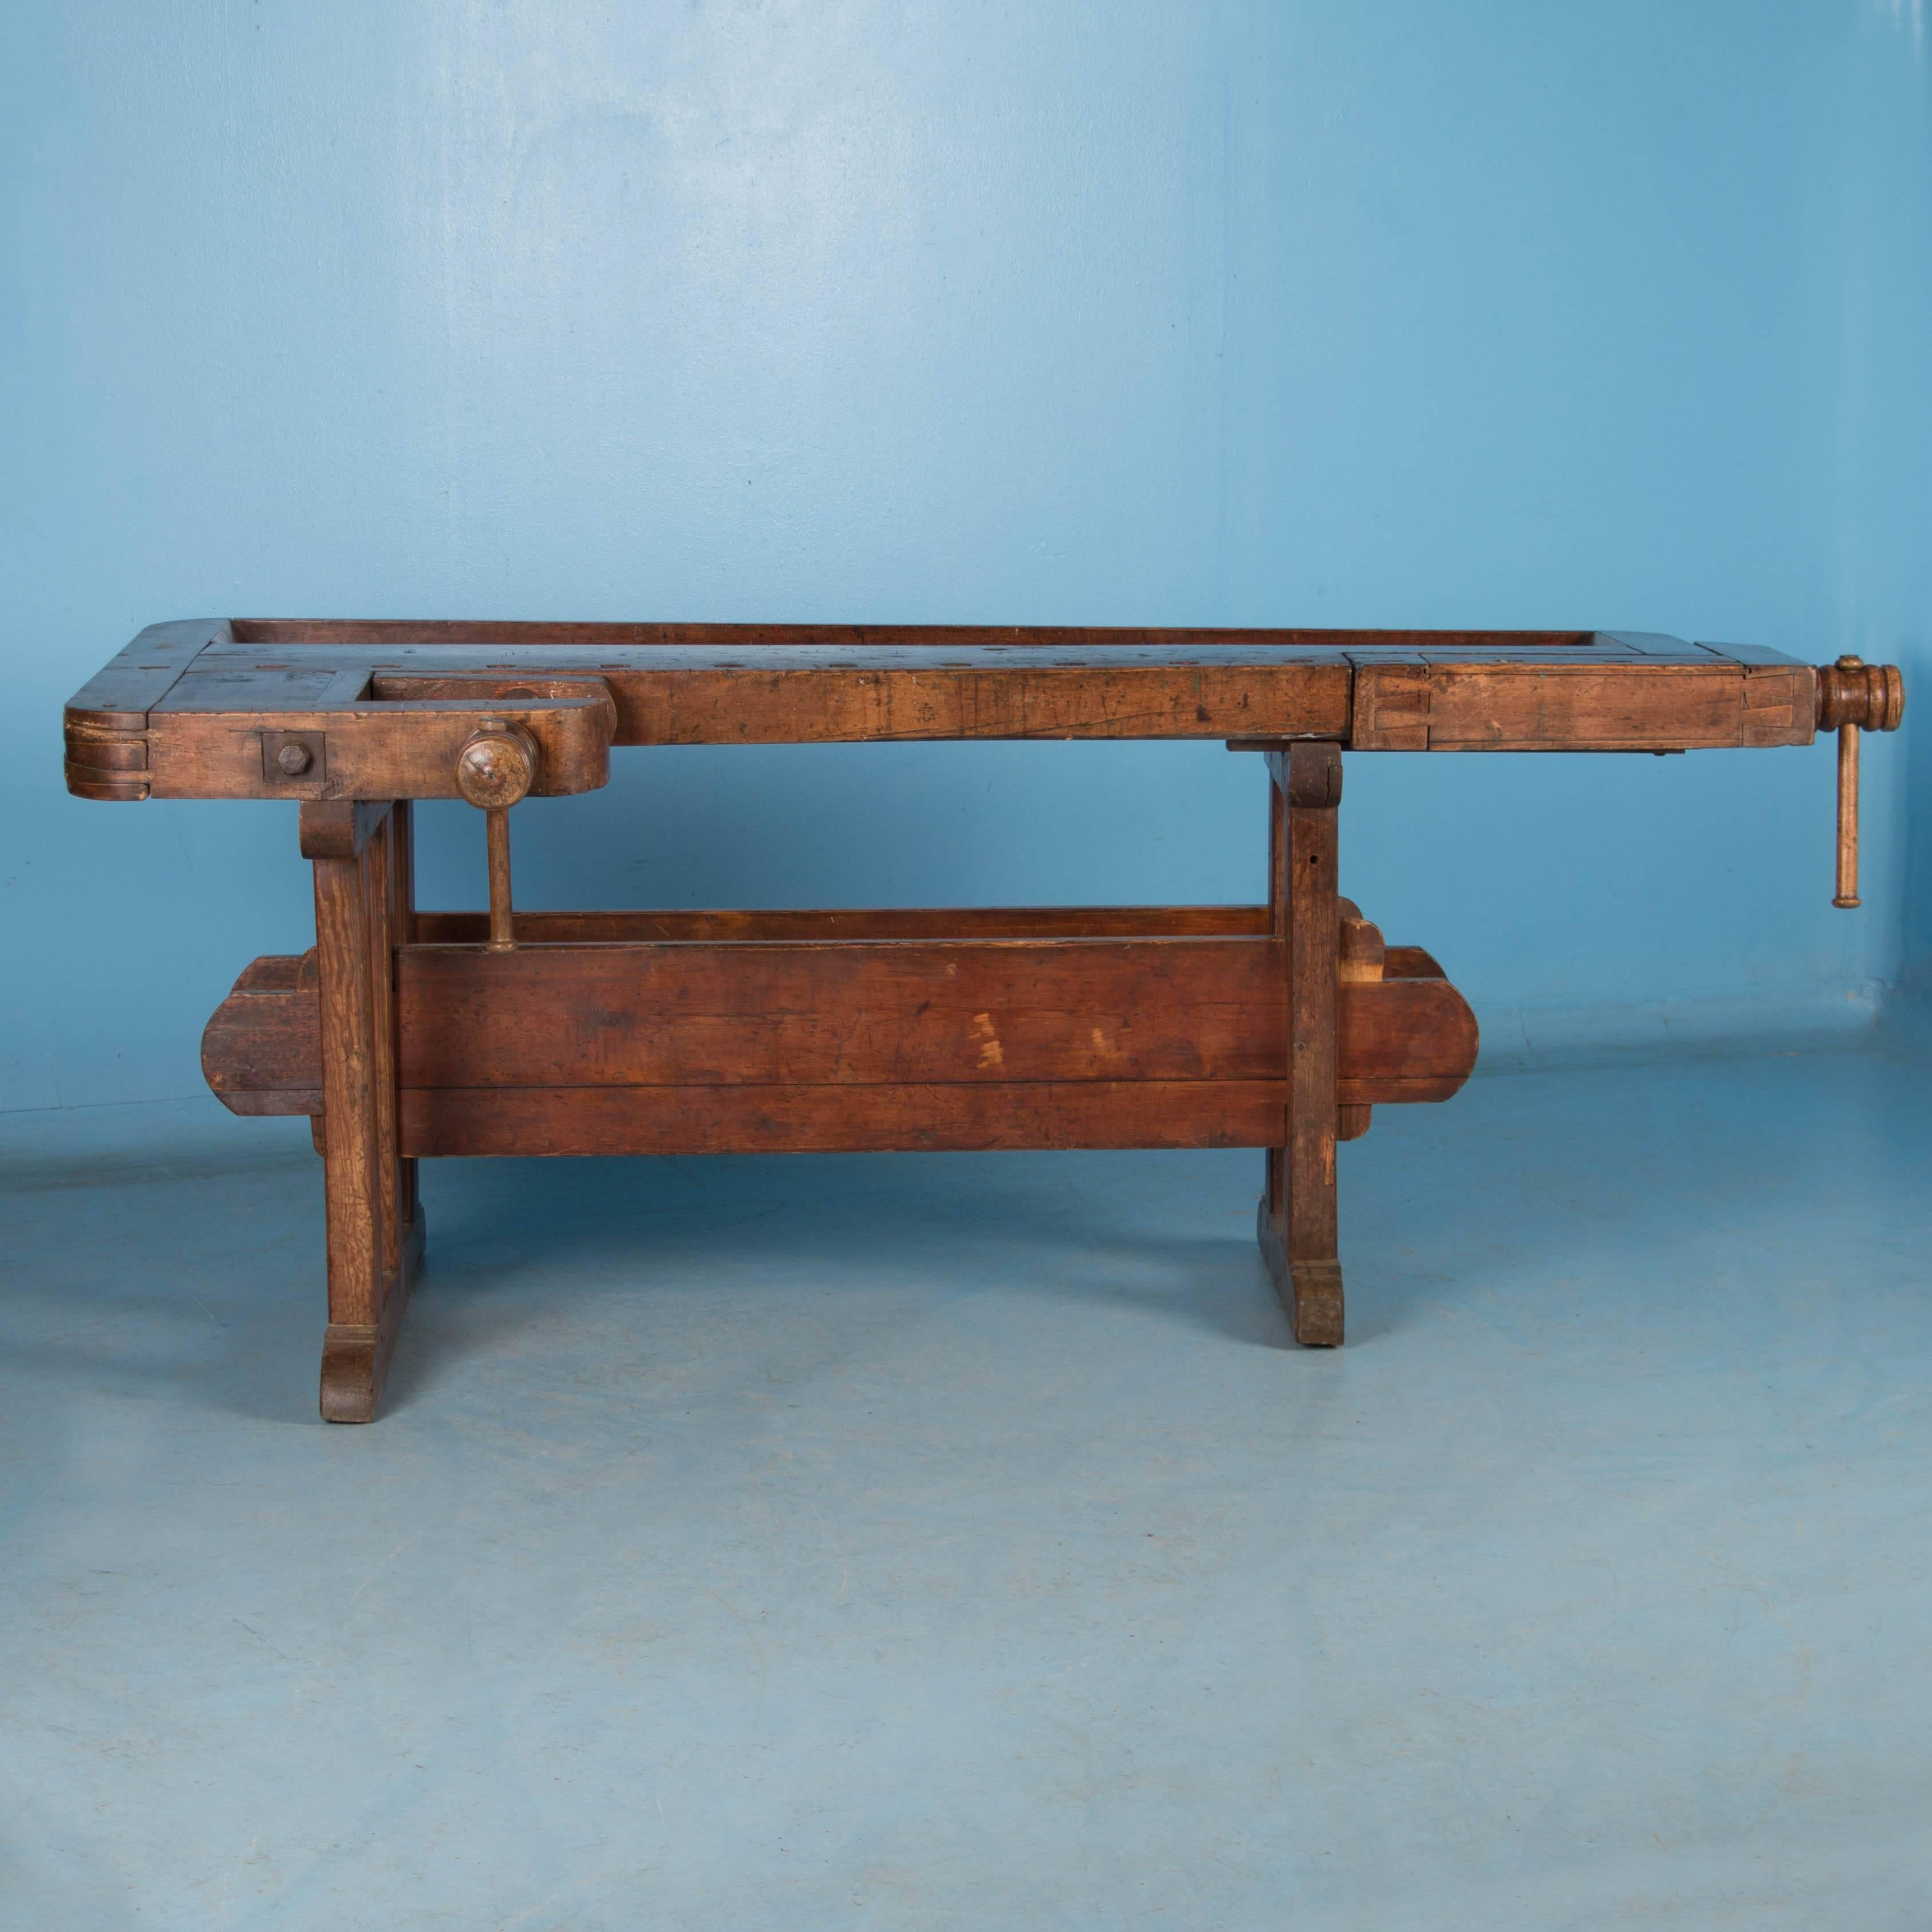 Beautiful antique Danish carpenters' workbench, bearing an incredible patina after years of traditional use. Please examine the close up photos to appreciate the depth of the patina. It has two wooden vices with wood handle and a recessed tray where